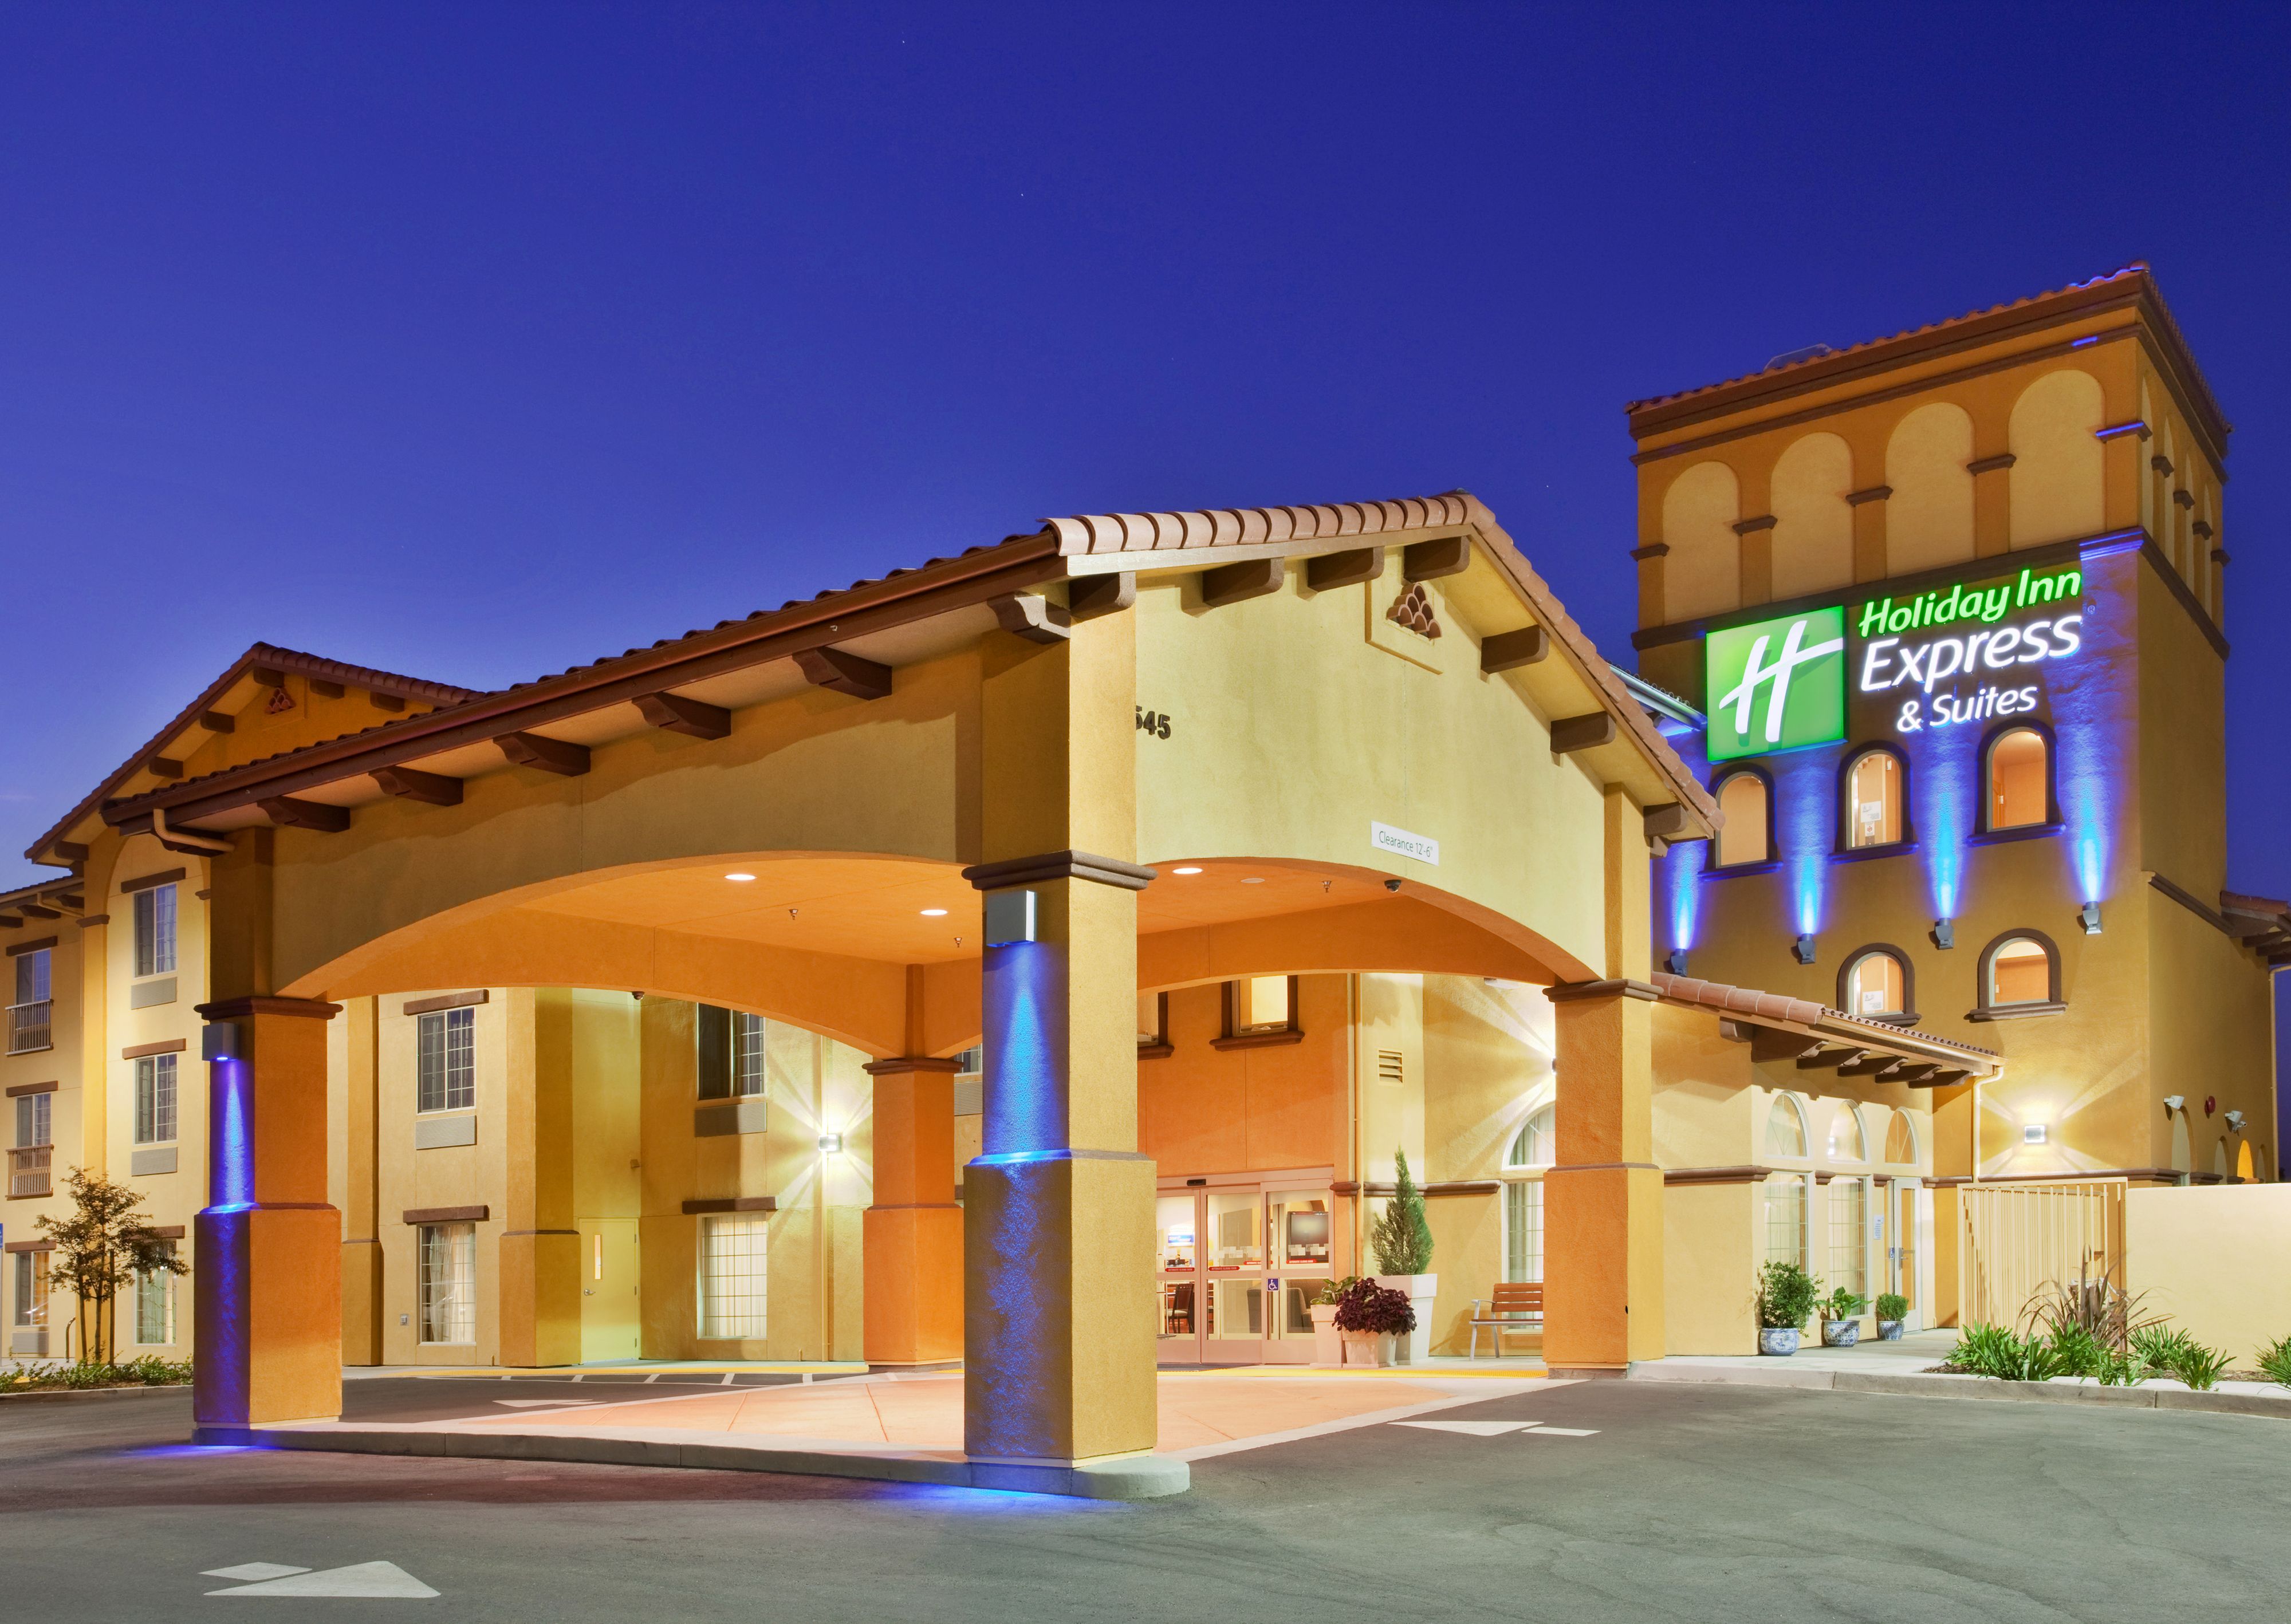 holiday-inn-express-and-suites-willows-2532850100-original.jpg